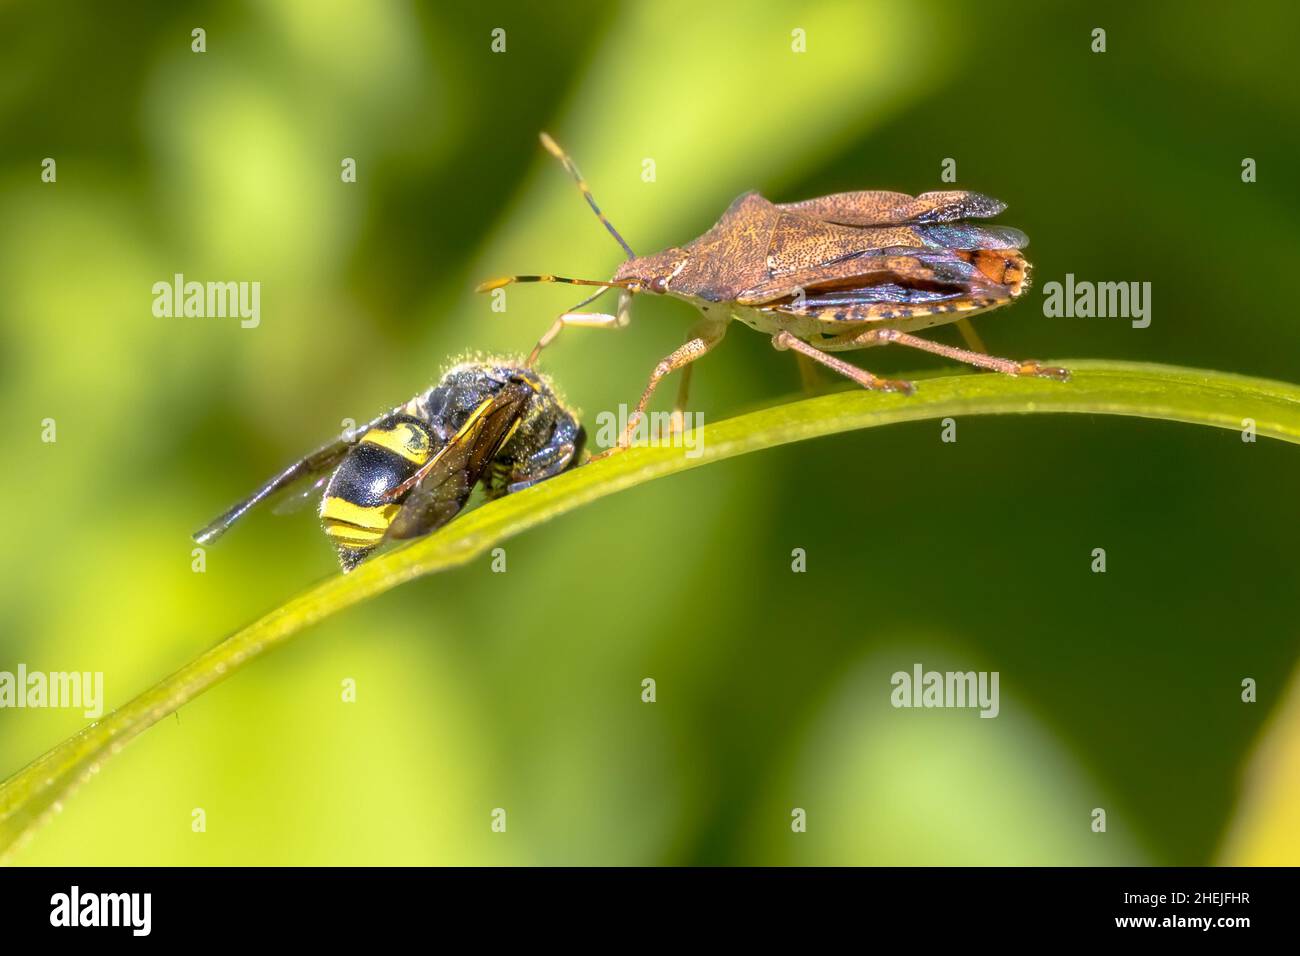 Heteroptera with wasp prey. This insect is a true predatory beetle preying on other insects. Wildlife scene in nature of Europe. Netherlands. Stock Photo